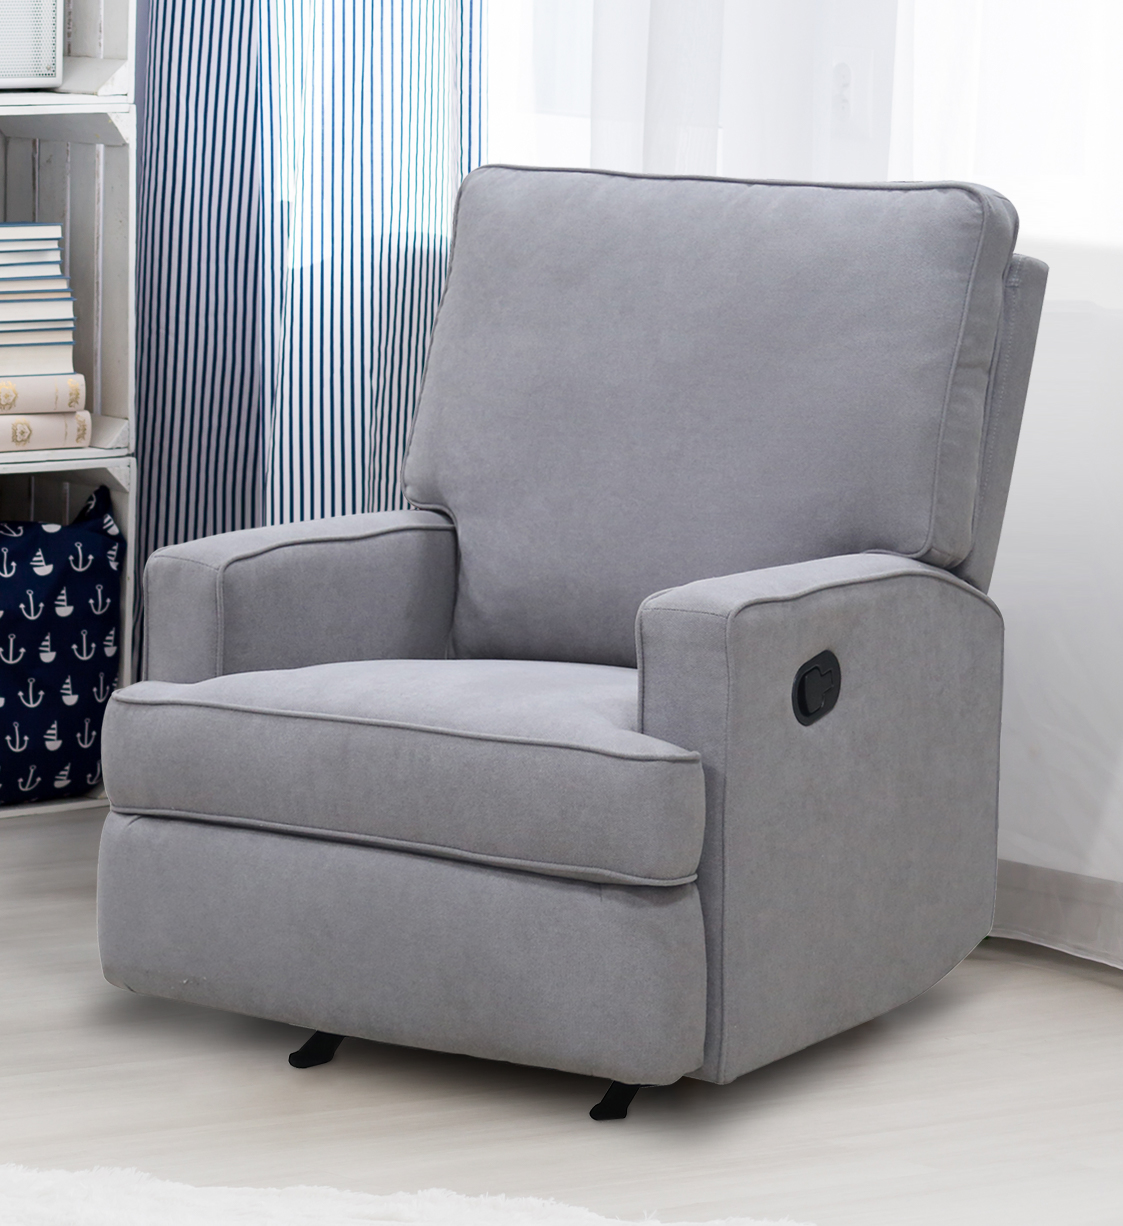 Baby Relax Salma Rocking Recliner Chair